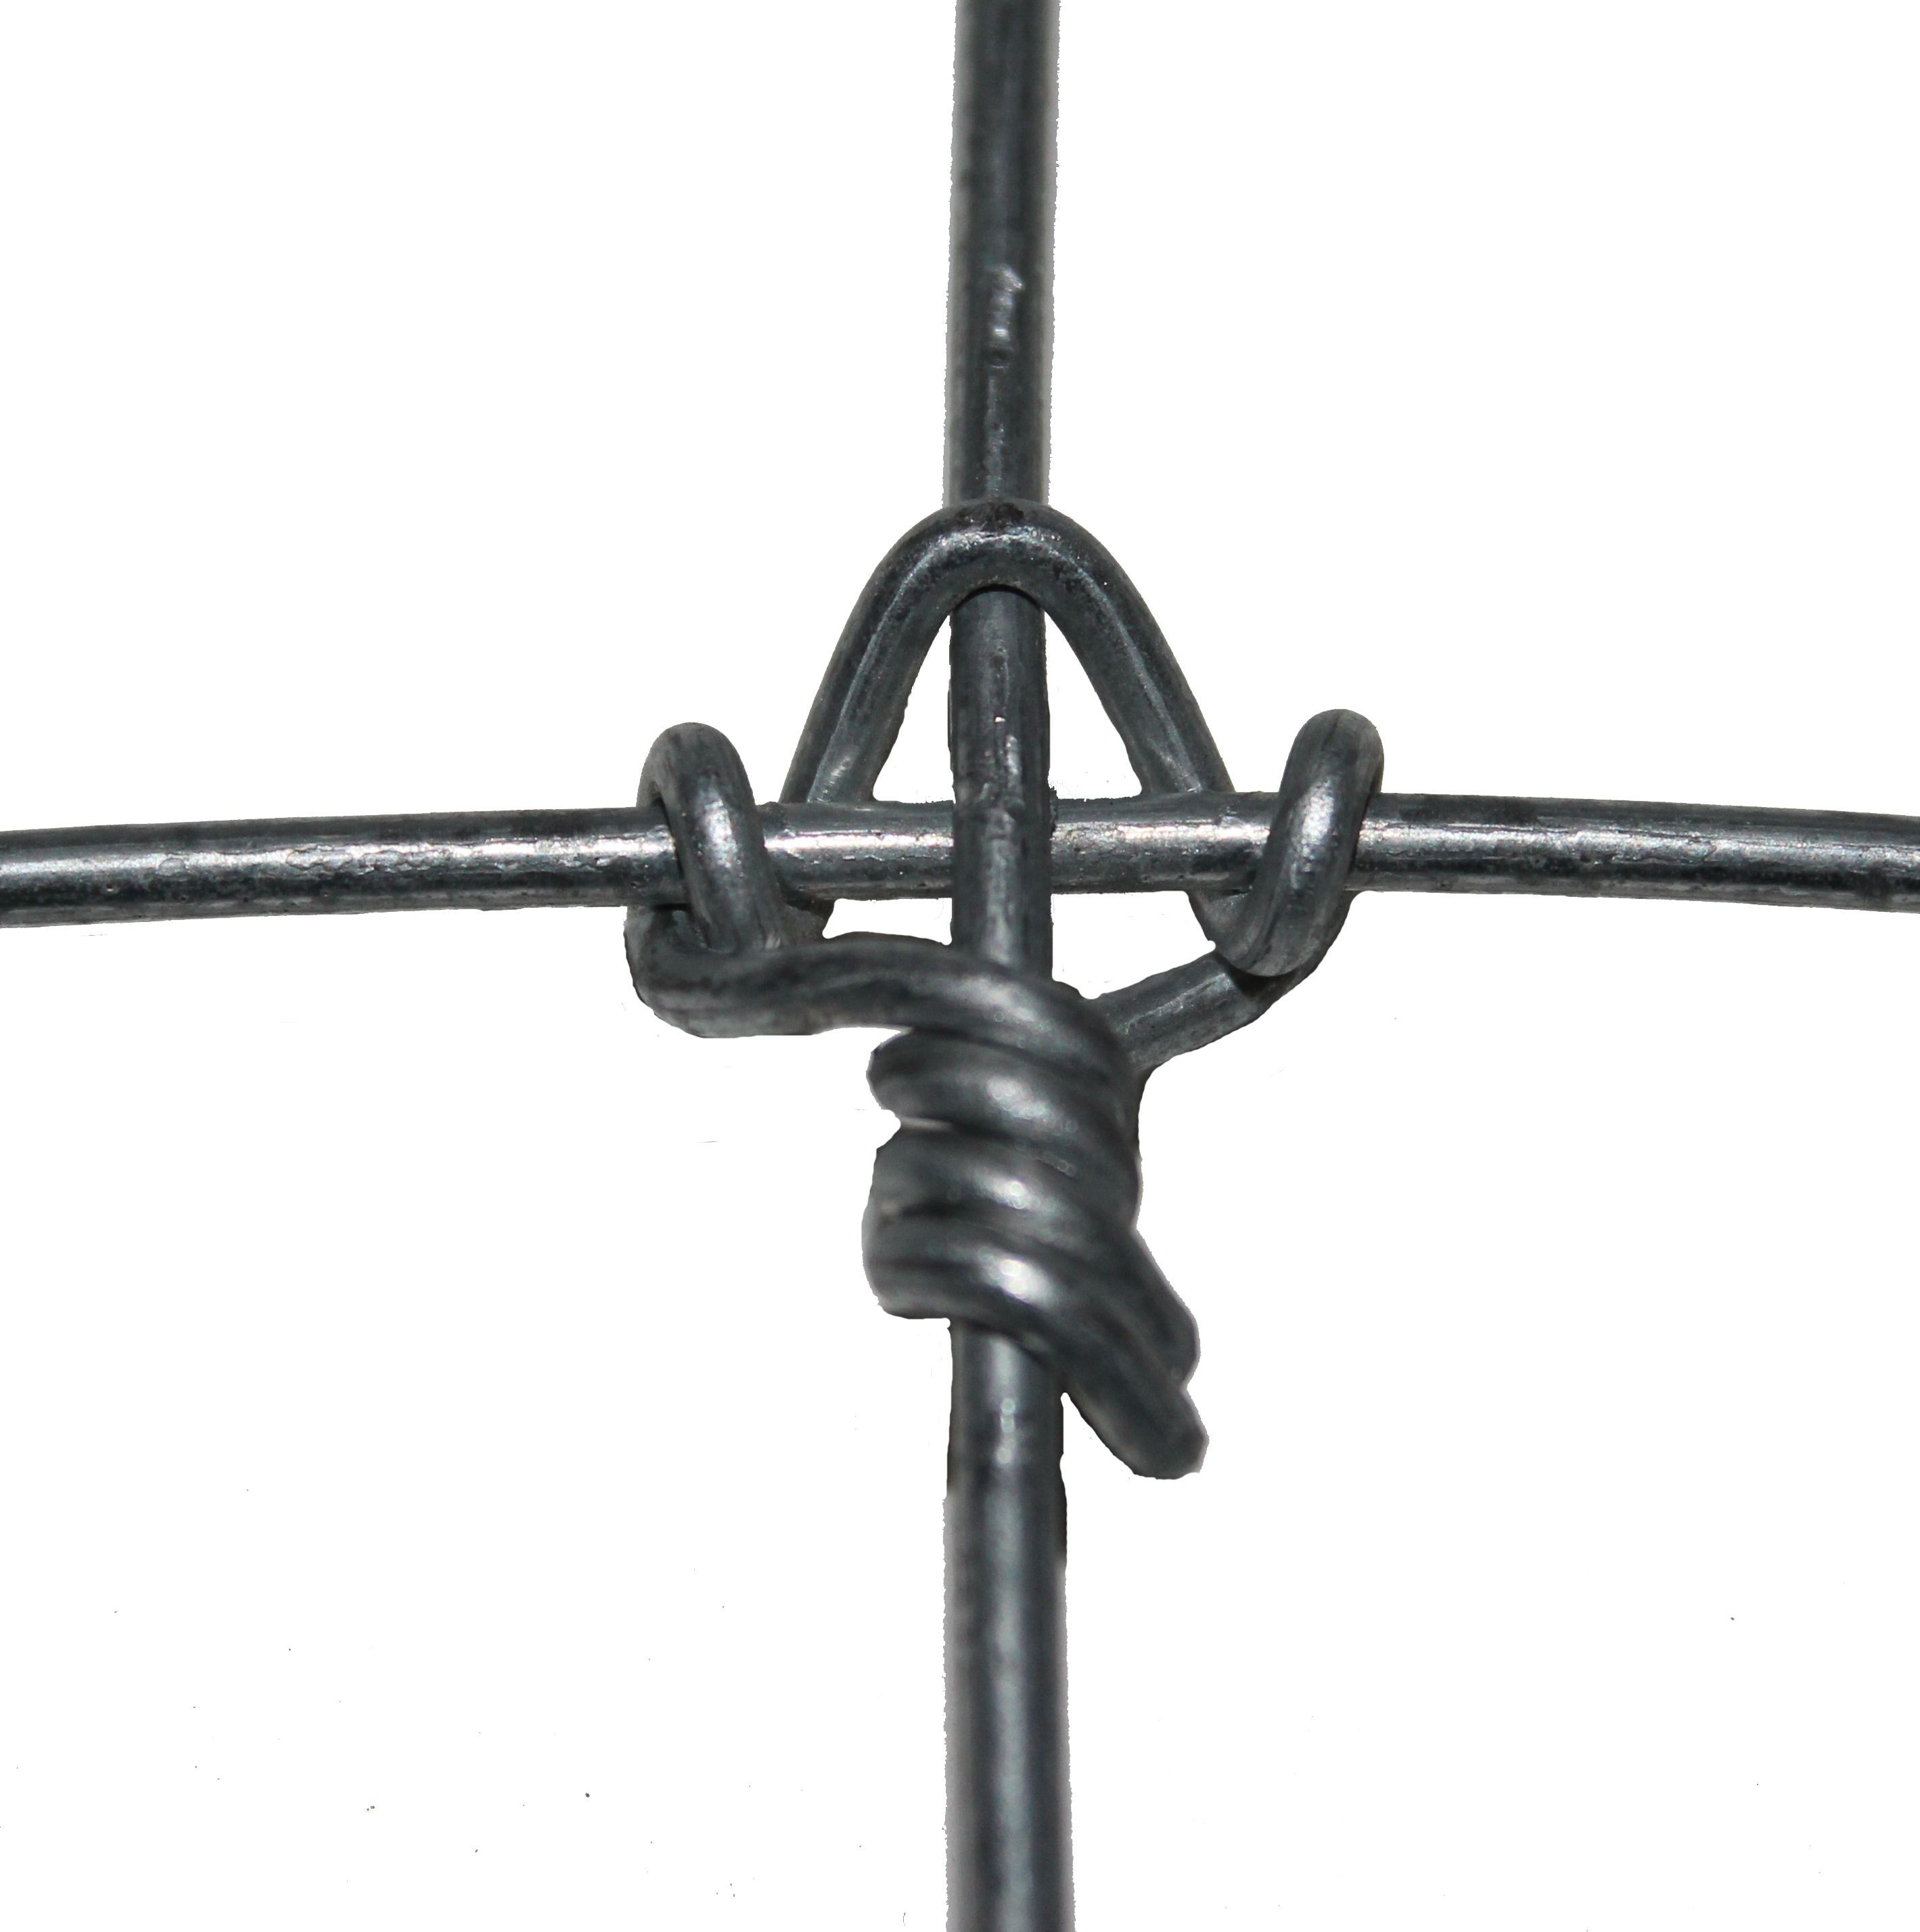 Fixed Knot Wire Deer Fence is constructed of Stainless and Galvanized Steel